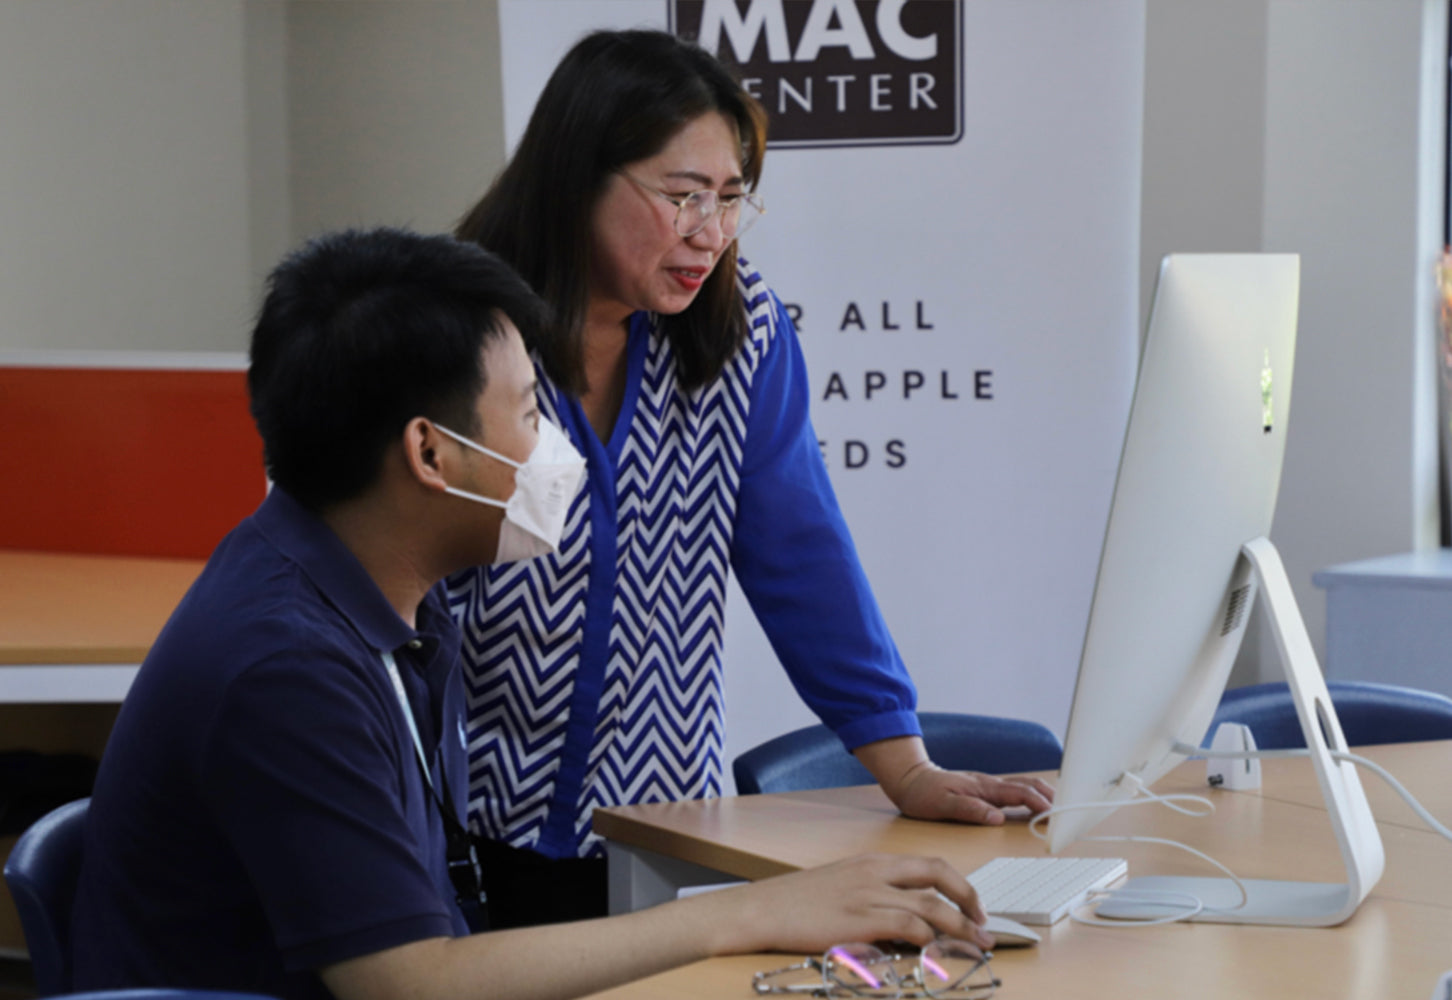 Power Mac Center opens Ateneo Coding, Technical, & Multimedia Basecamp with Apple devices donation